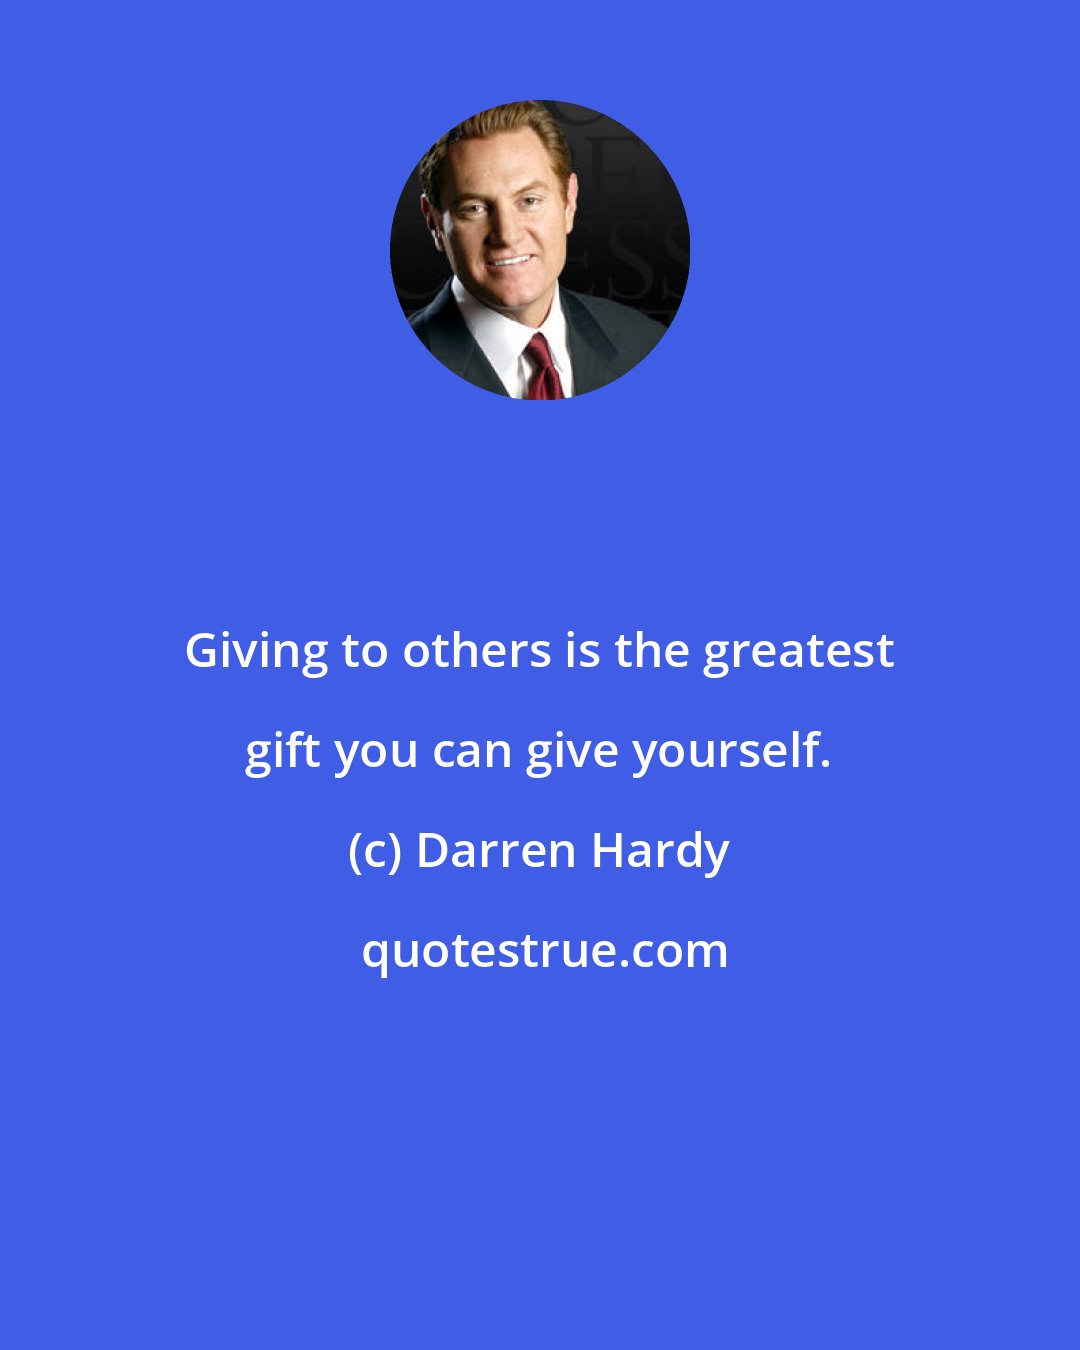 Darren Hardy: Giving to others is the greatest gift you can give yourself.